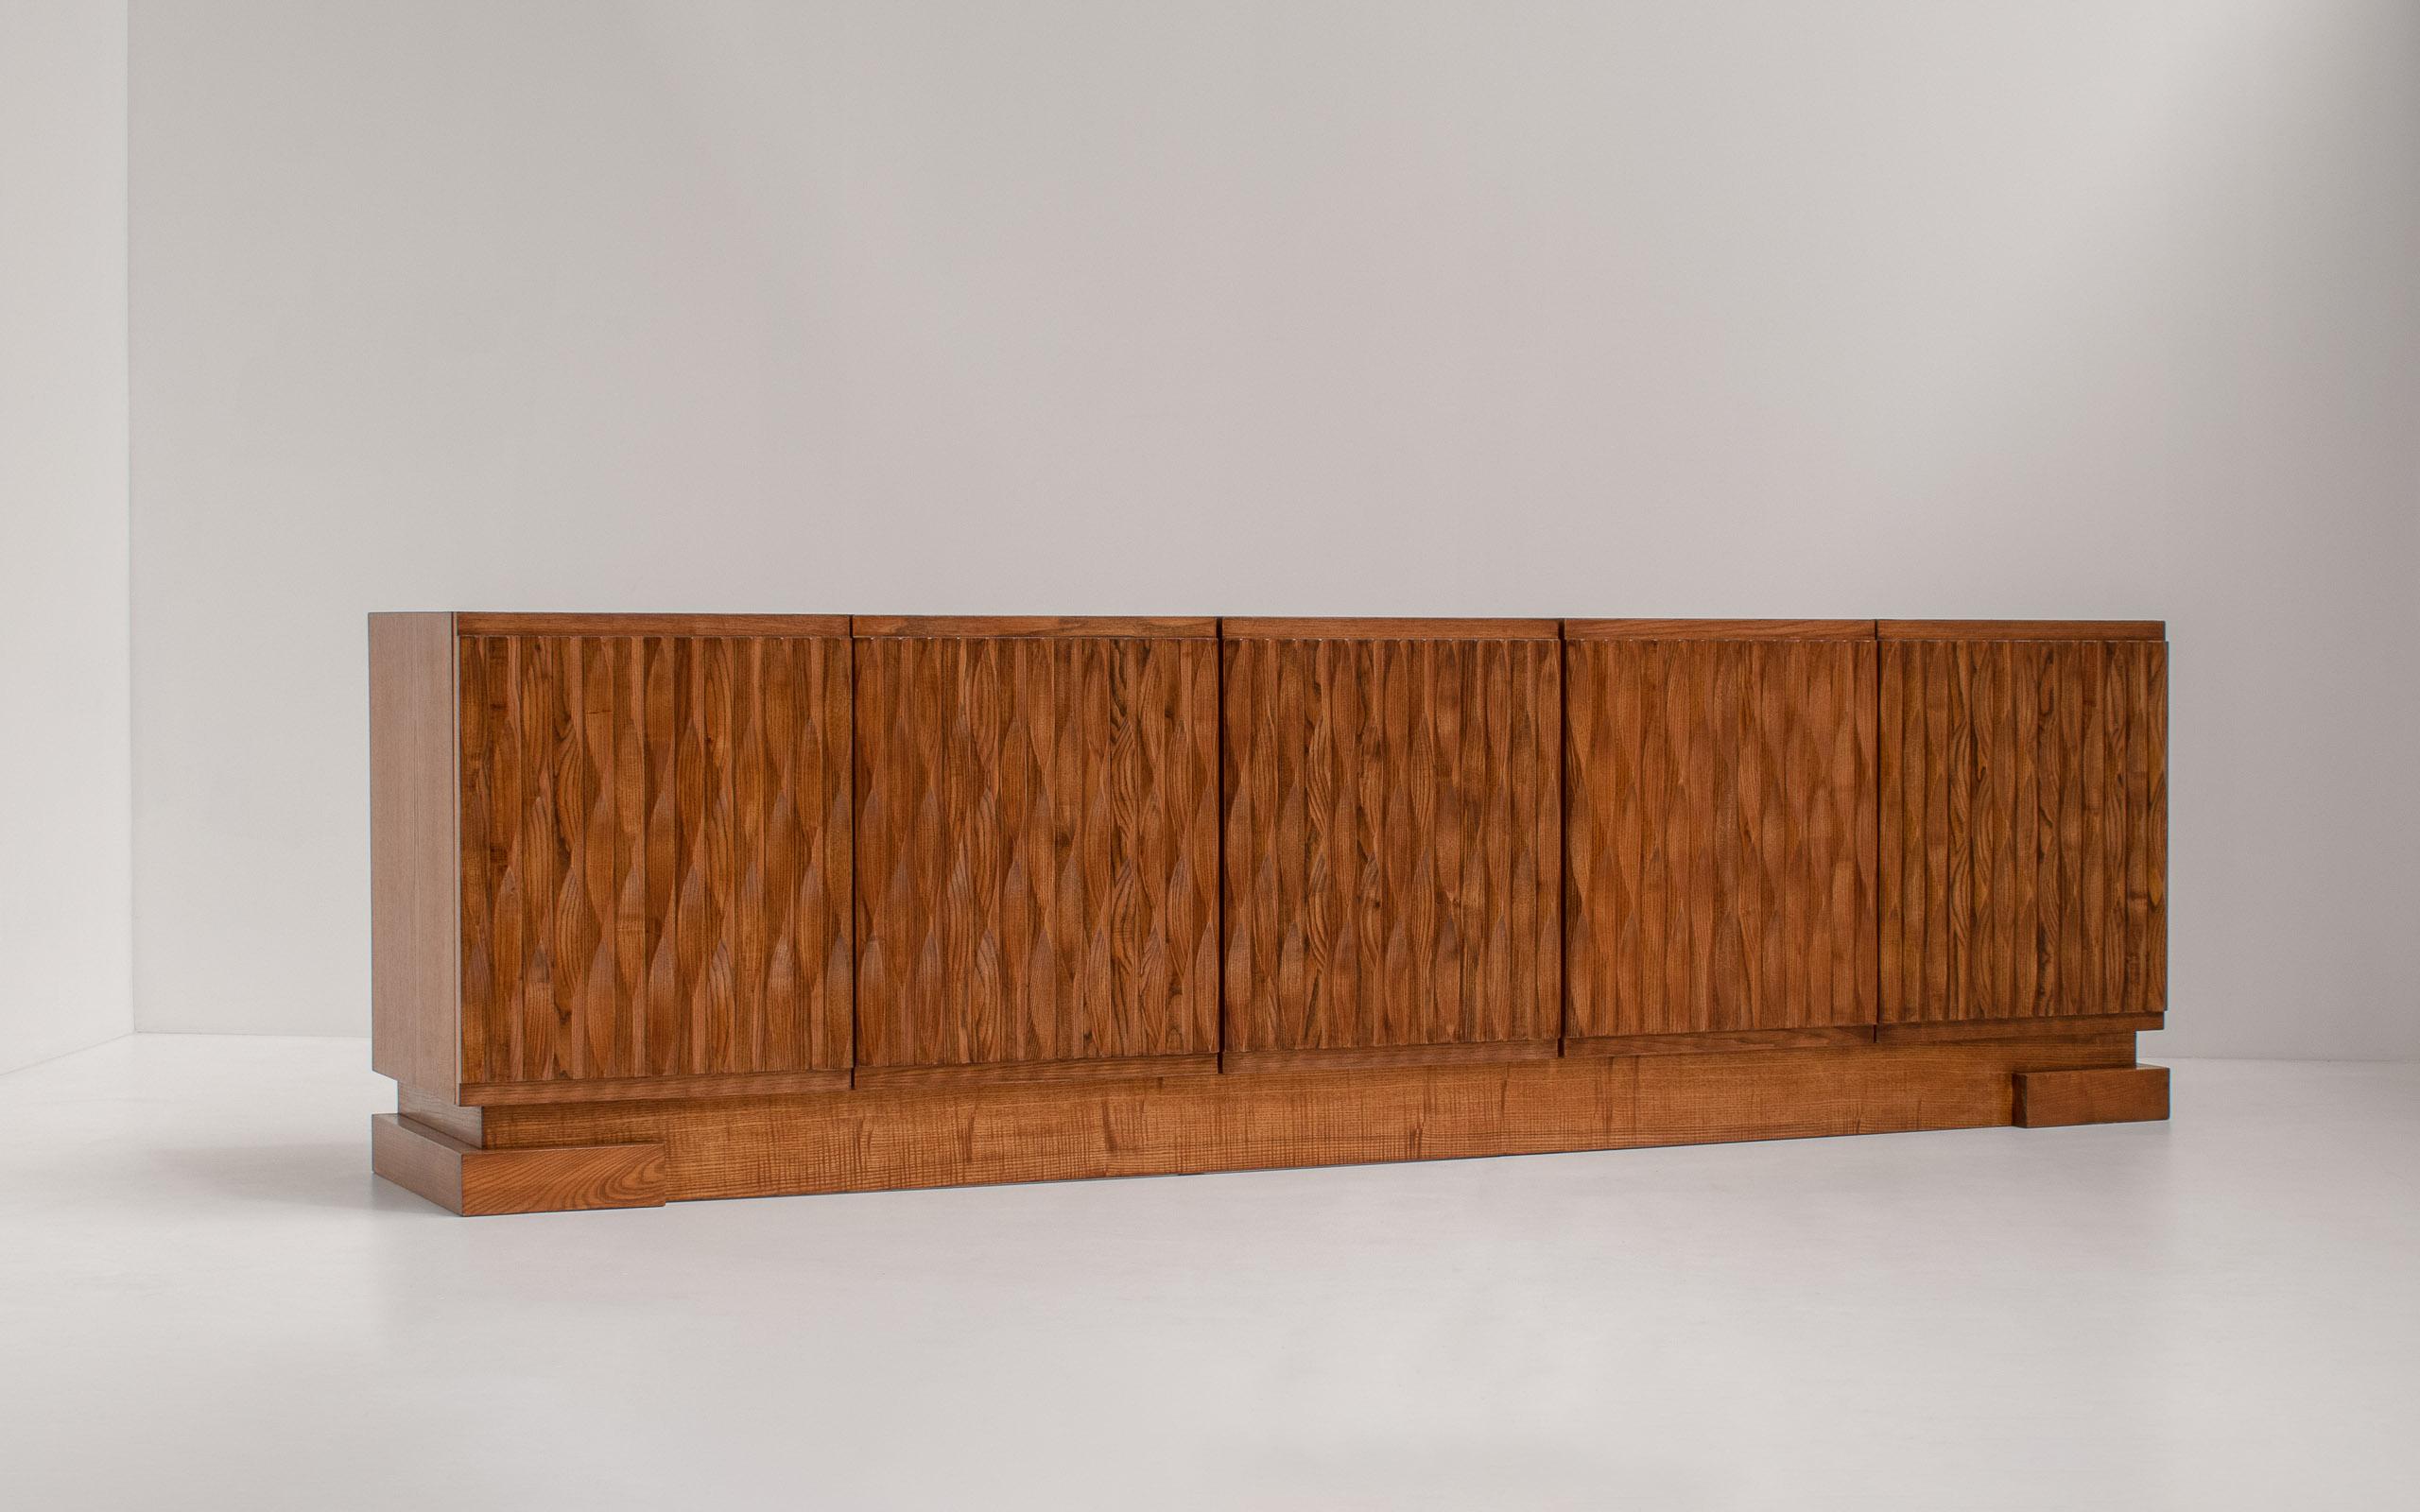 Impressive graphic, brutalist-style design credenza, Belgium 1970s

Because of its dimensions and the beautiful sculptured doors, it beats all the other sideboards out there. The woodwork is out of this world, and the blonde oak gives a delightful